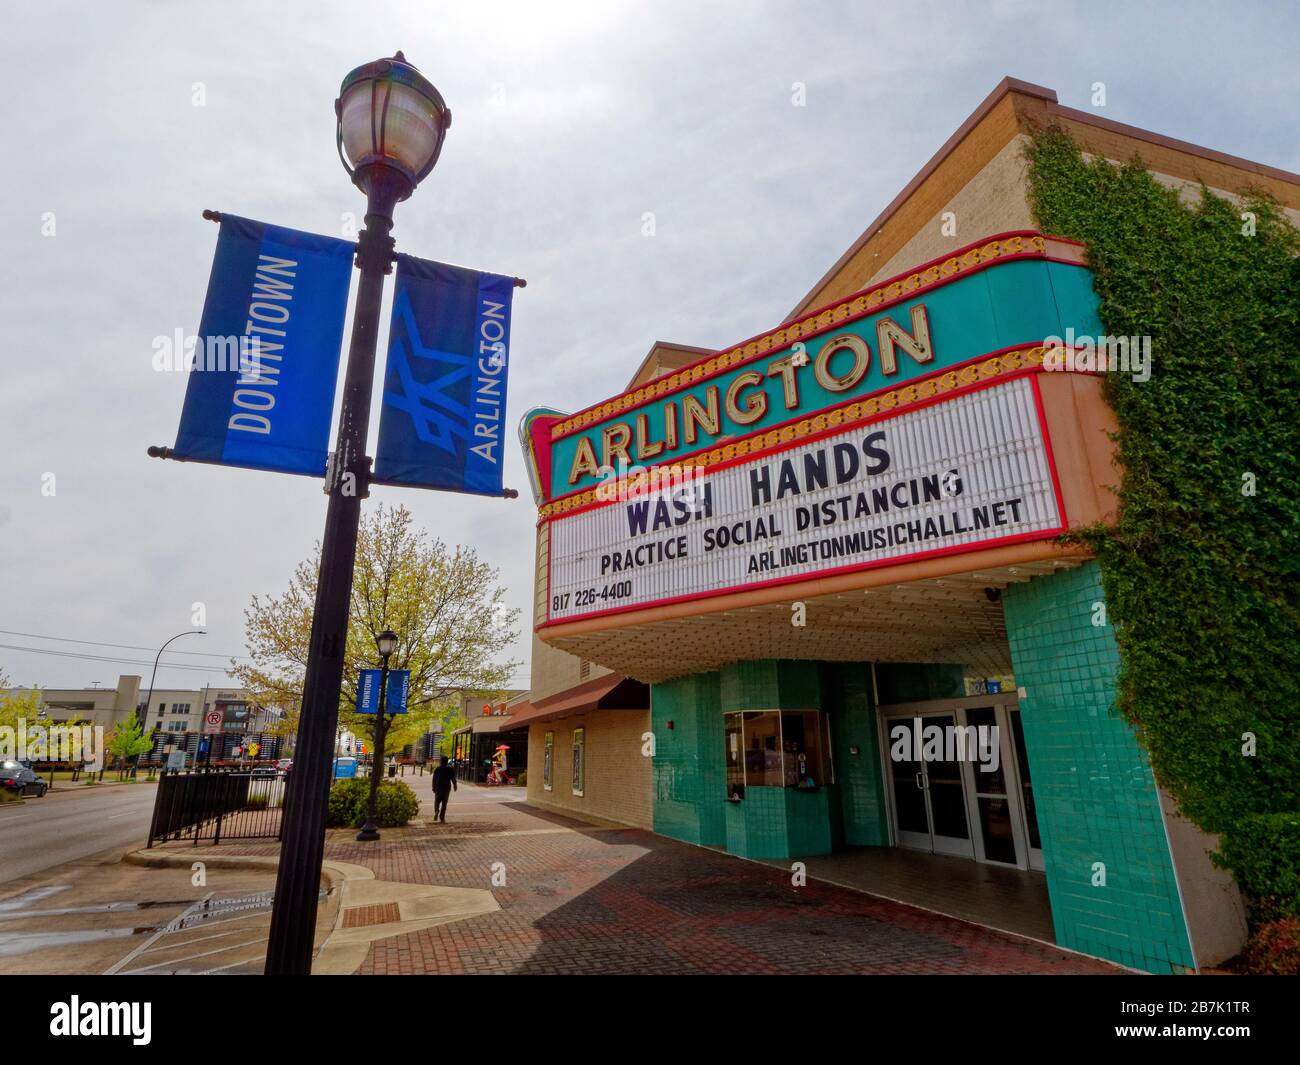 Arlington, Texas, USA (16/03/2020) Downtown Arlington's old movie theater tells residents to wash their hands frequently and don't stand close to anyone. Arlington located between Dallas and Fort Worth, Texas. Where over 350,000 people live. Old movie theater is now used for live performances. Stock Photo